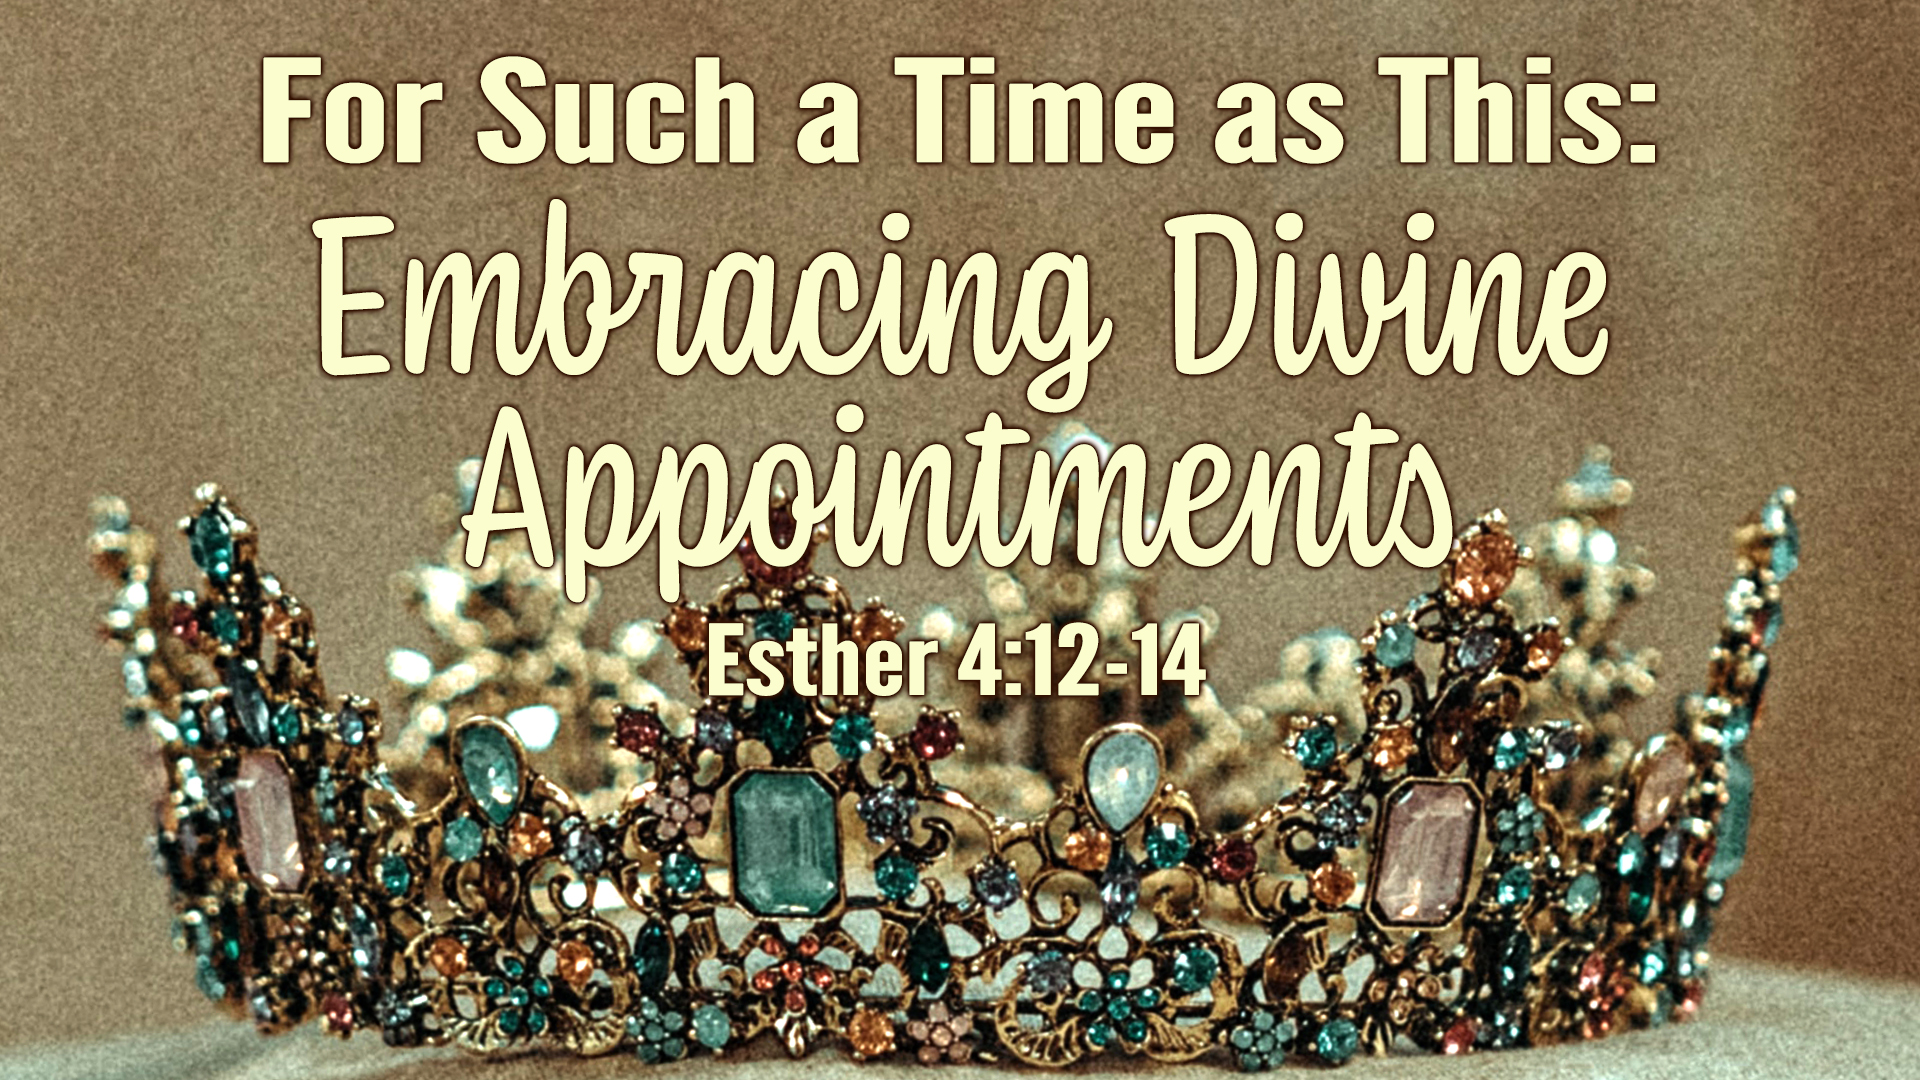 For Such a Time as This: Embracing Divine Appointments